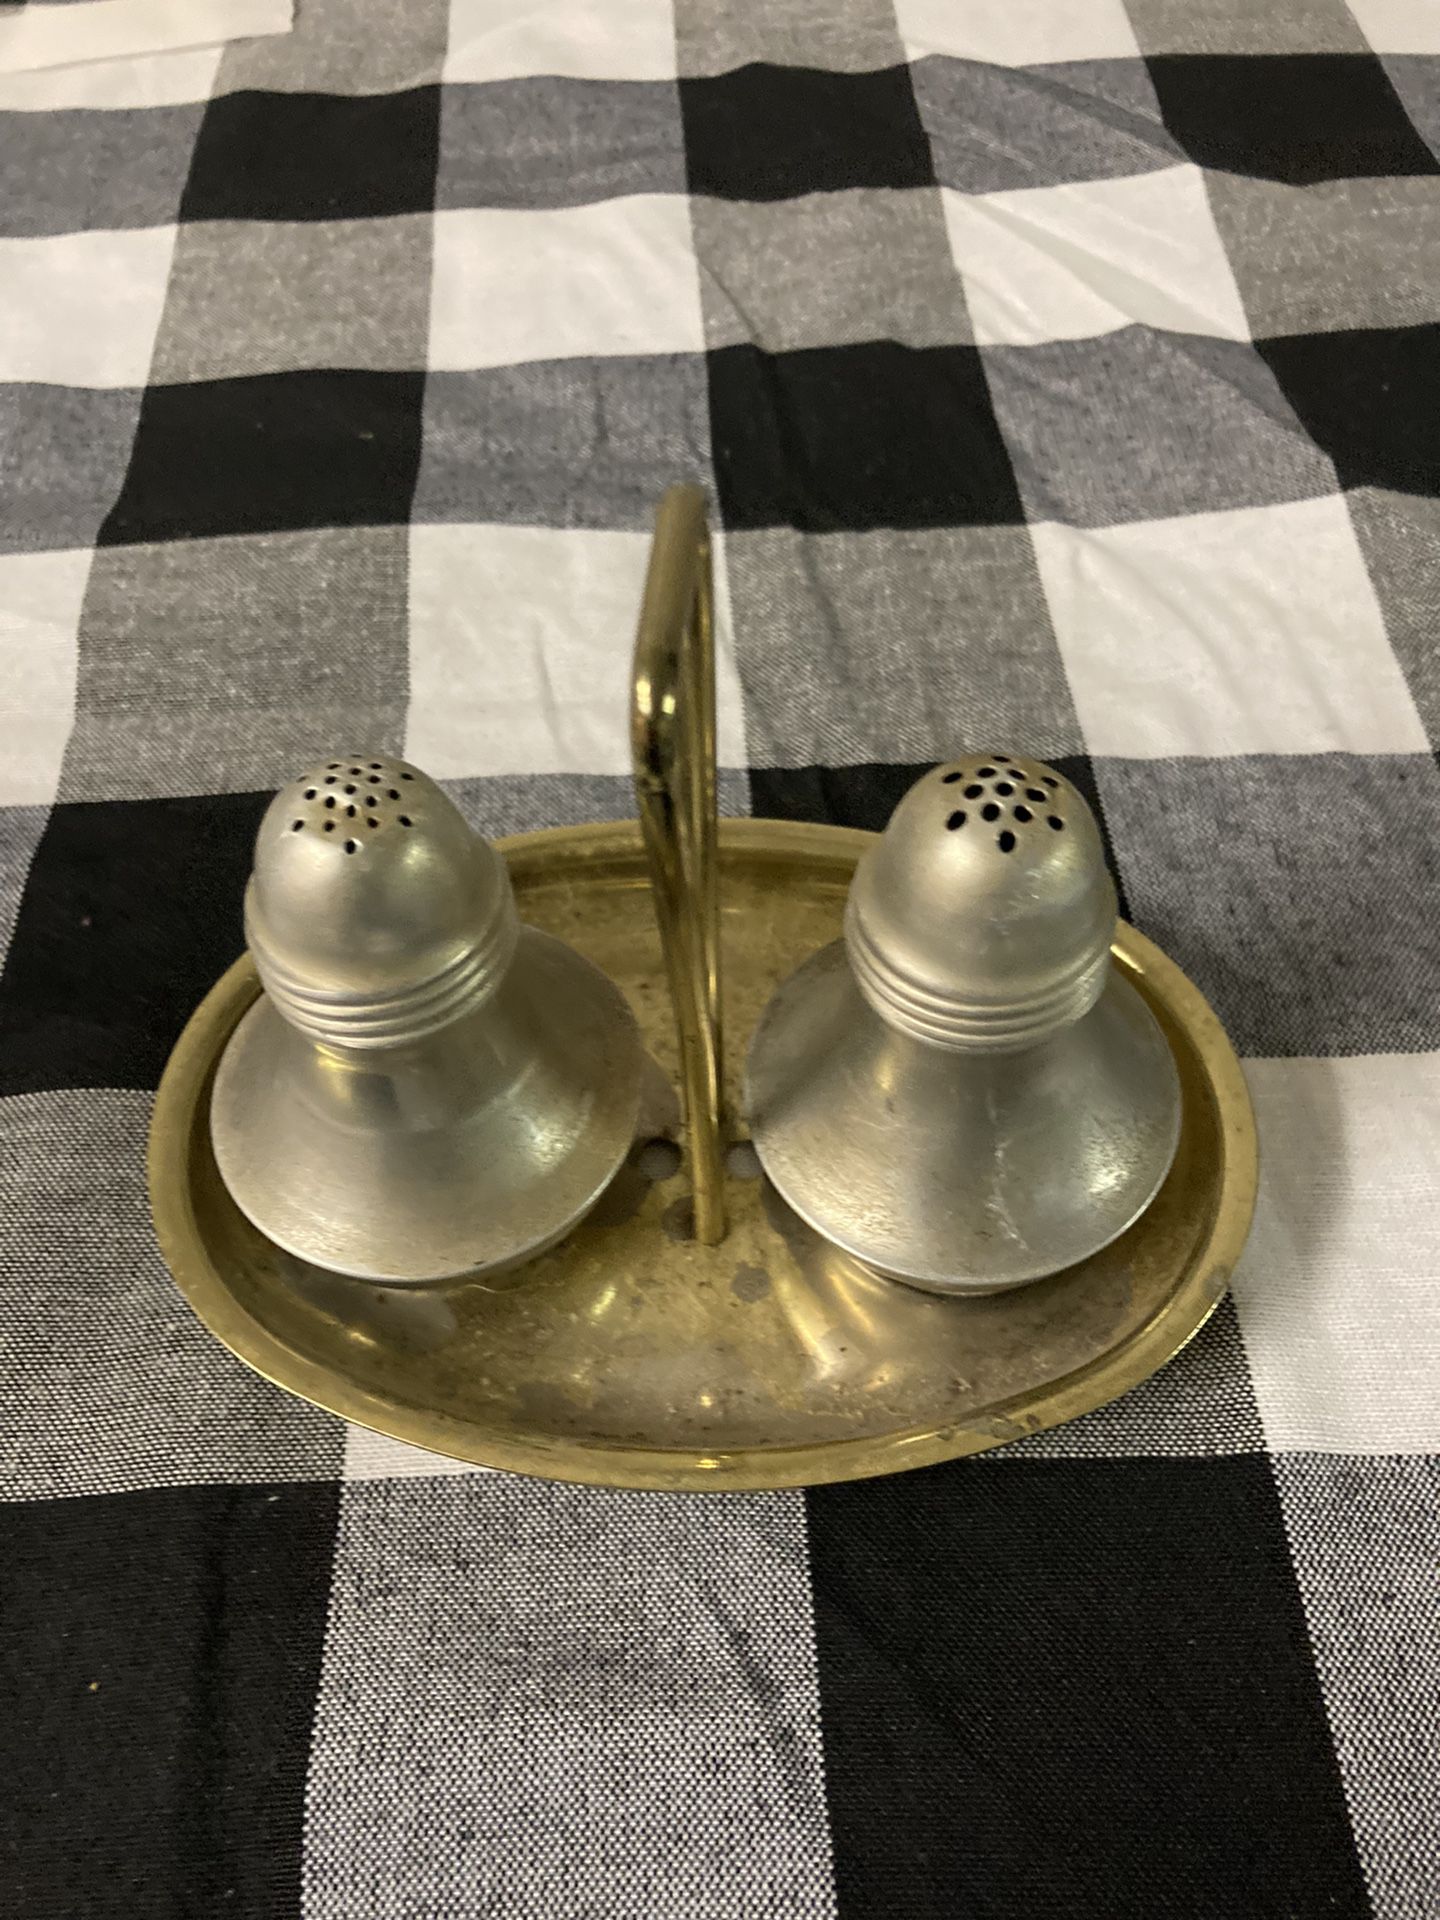 Salt And Pepper Shakers W/Holding Tray